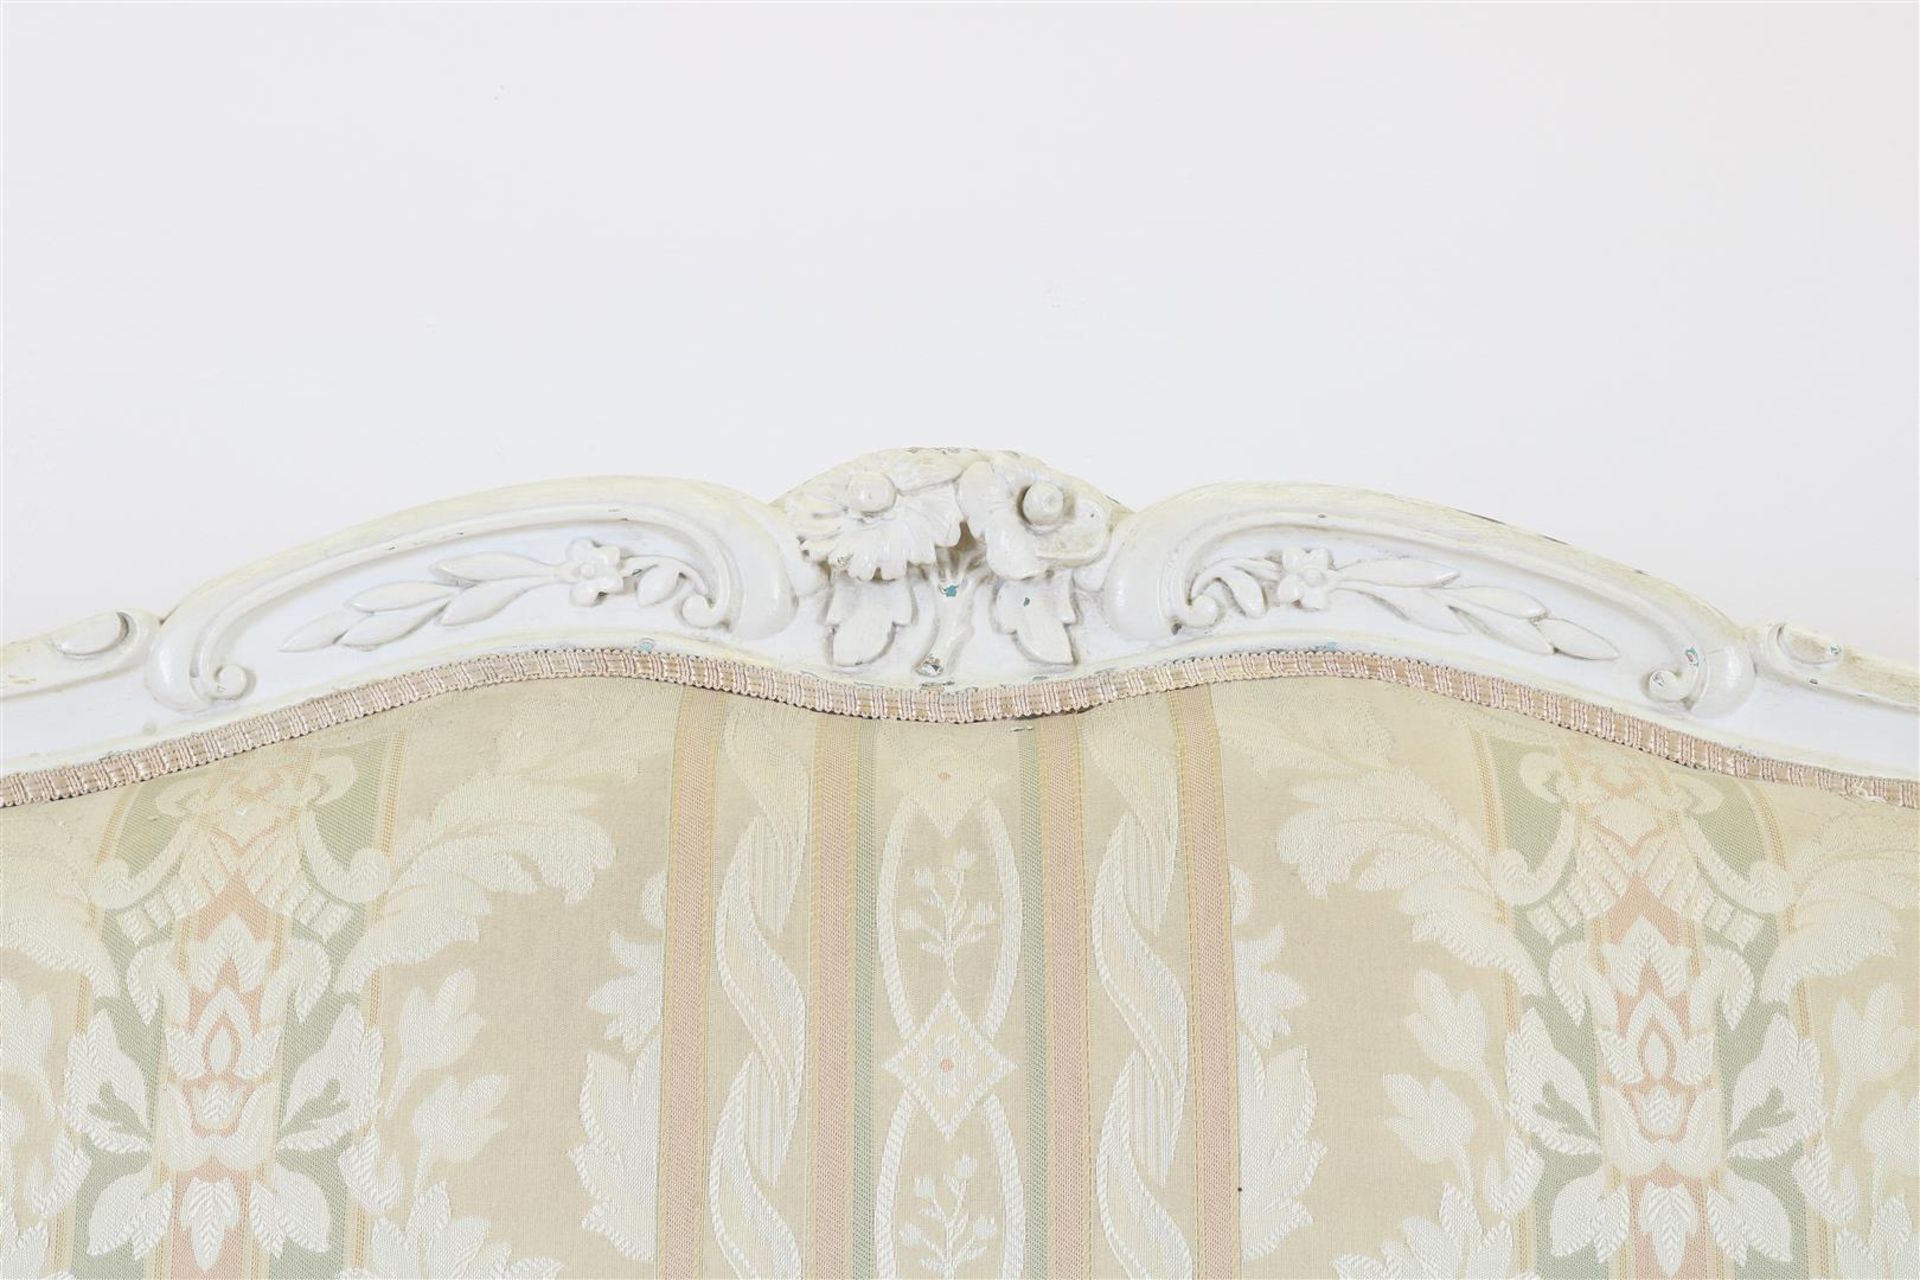 White lacquer Louis XV style sofa with carved crest and armrests, covered with damask, 110 x 163 x - Image 2 of 6